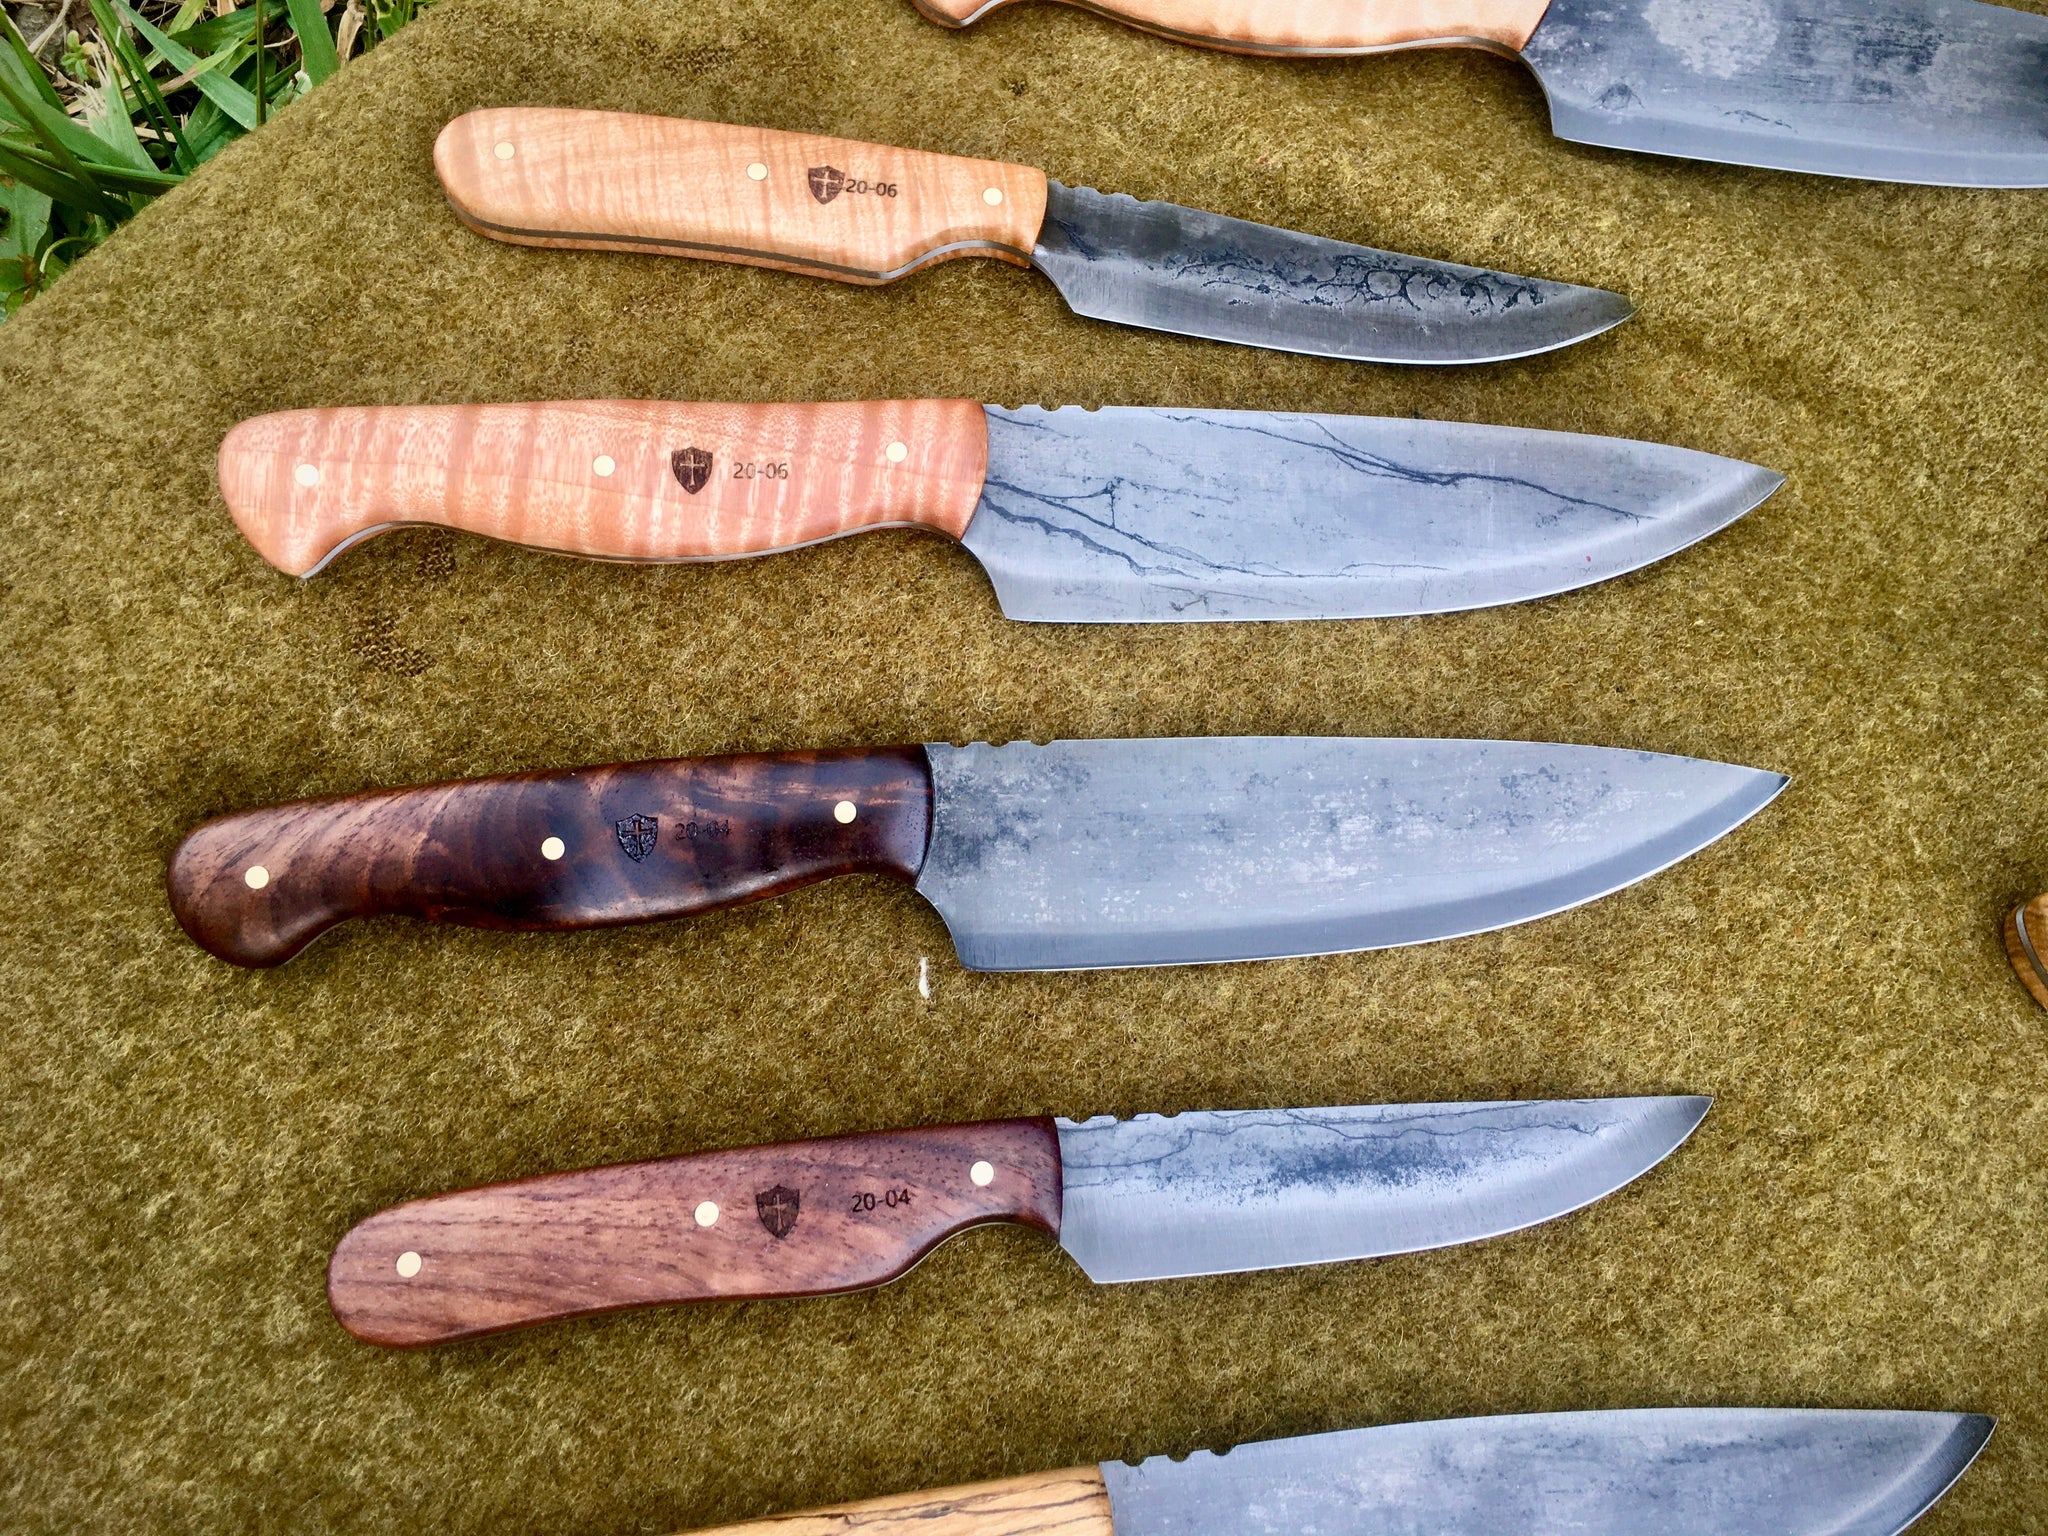 Hand Forged Paring Knife 20-06 – Zion's Farm